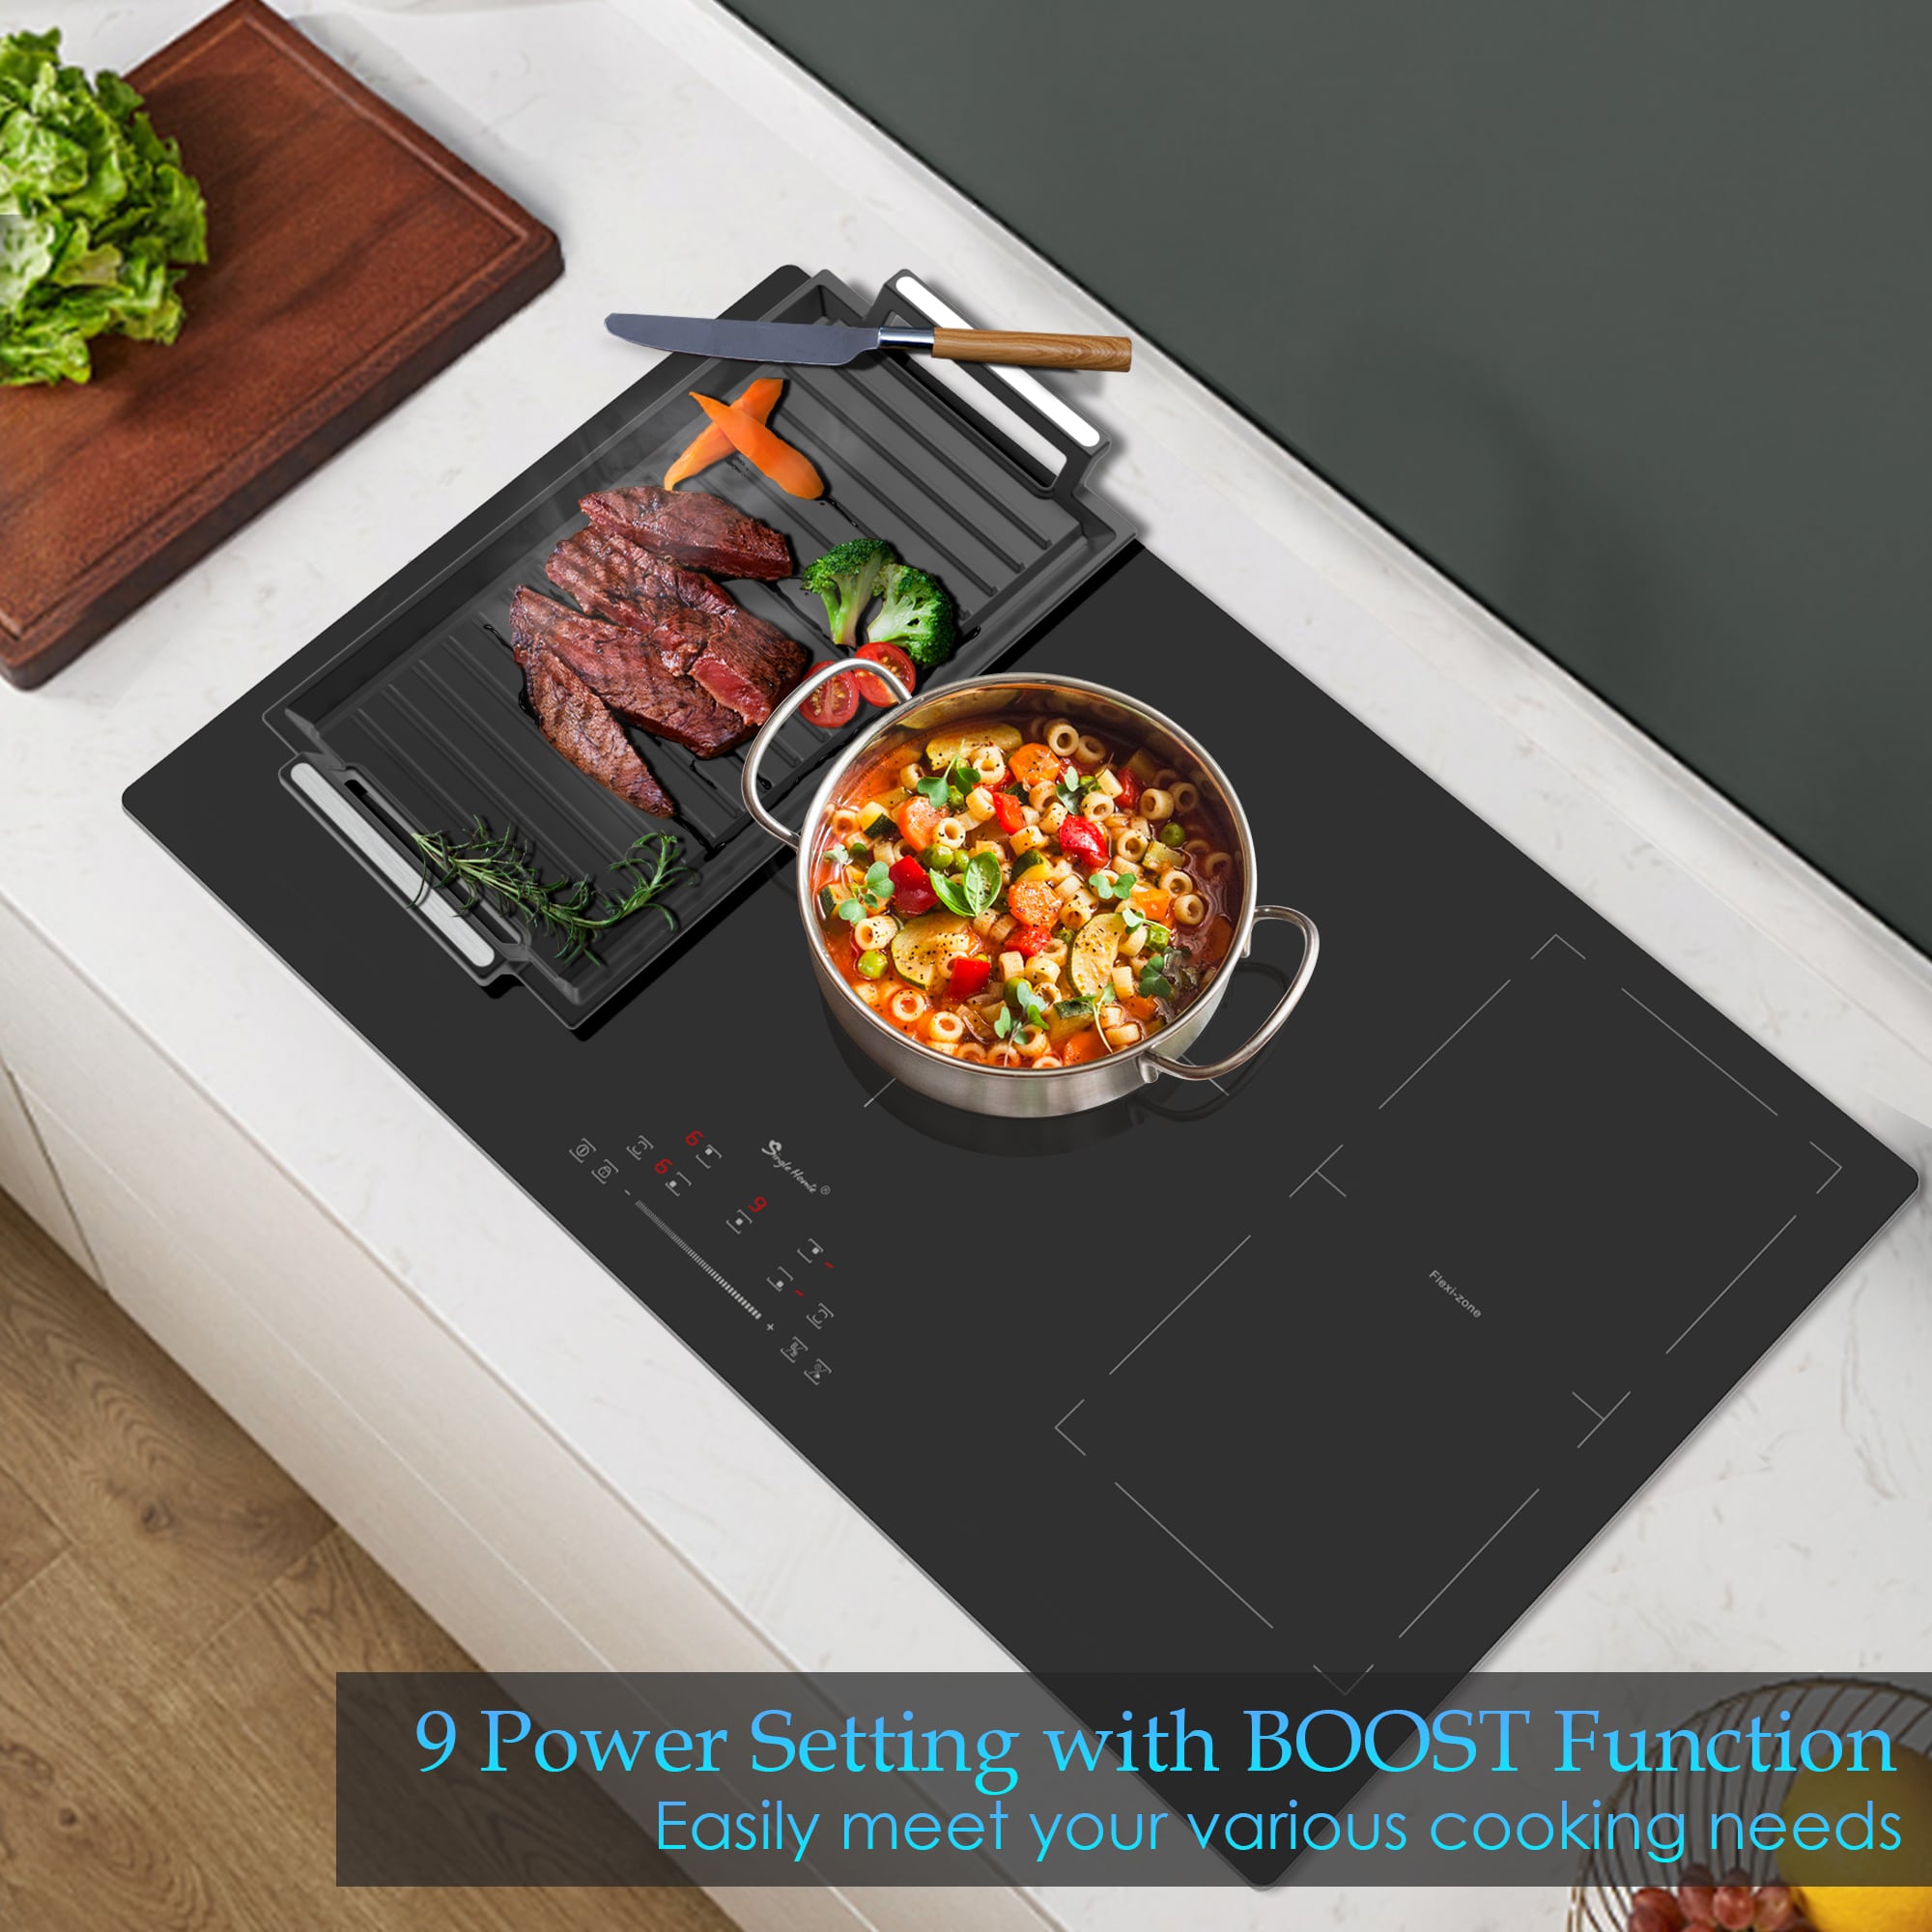 Portable Touch Induction Cooktop with LED Screen, 1000W Countertop Burner,  Induction Stove Cooker For Griddle, Pan, Tea Kettle, Outdoor, Indoor 